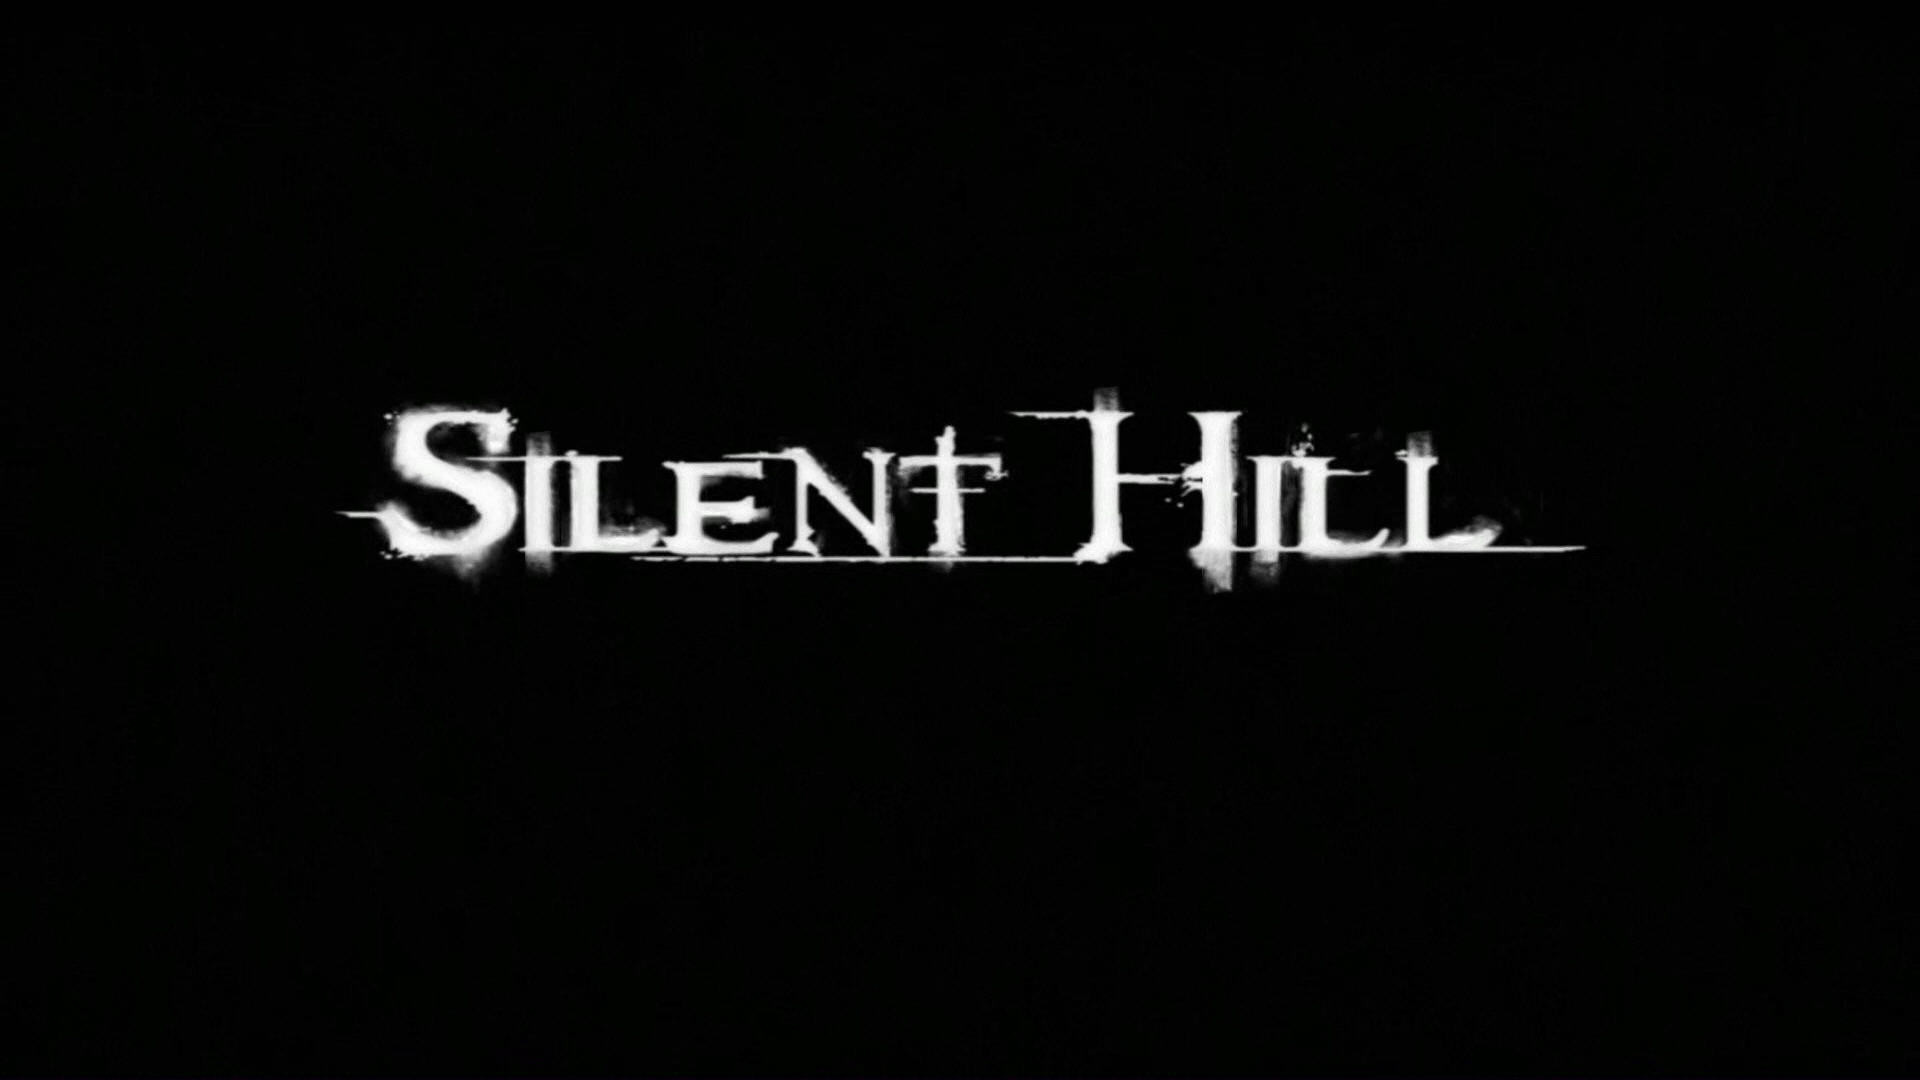 1920x1080 Silent Hill images Silent Hill HD wallpaper and background photos